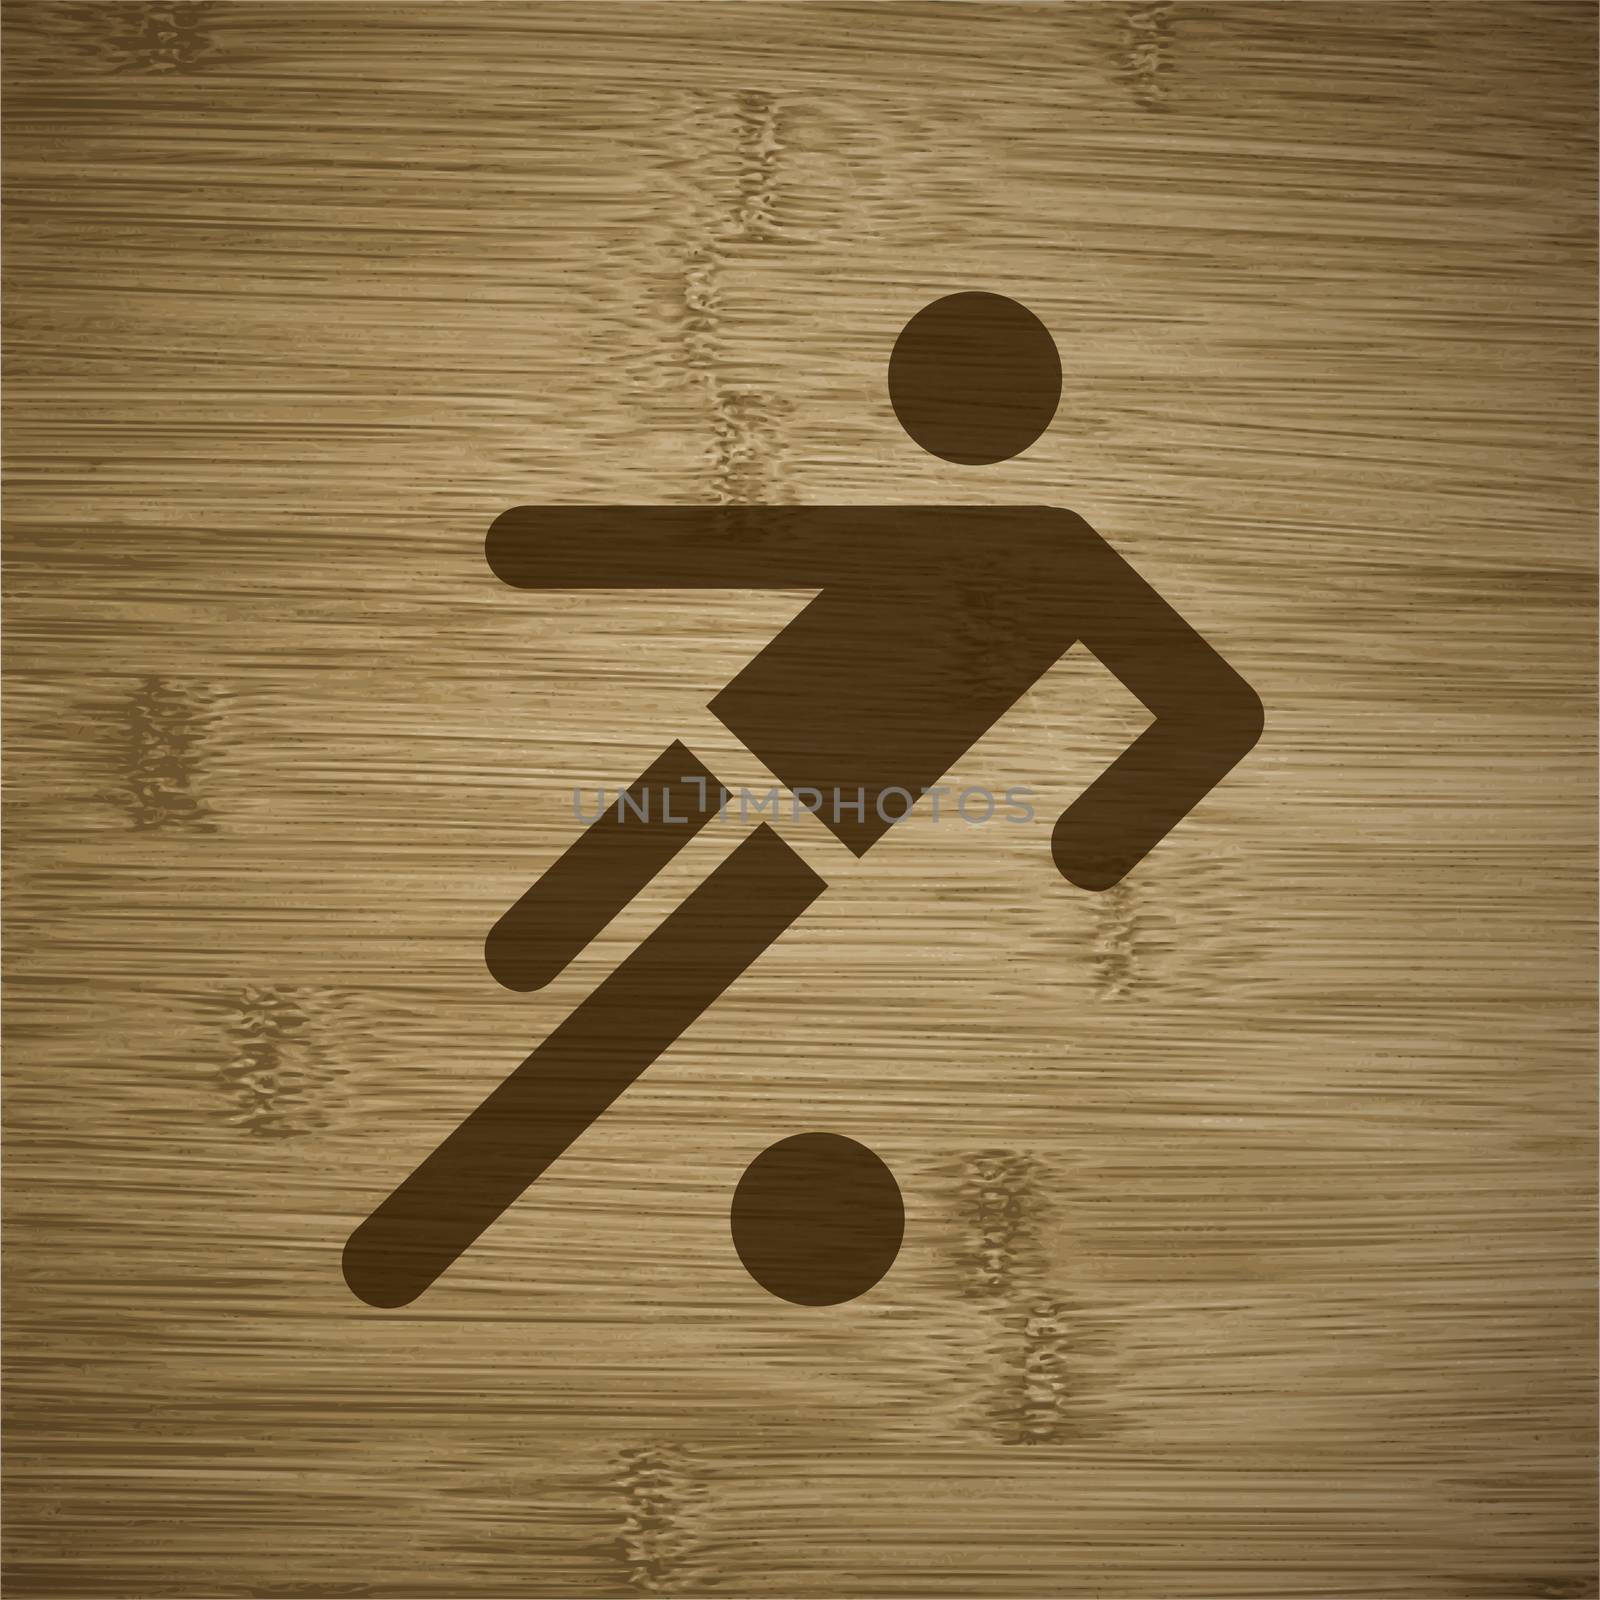 Soccer players icon. Football. Flat with abstract background.